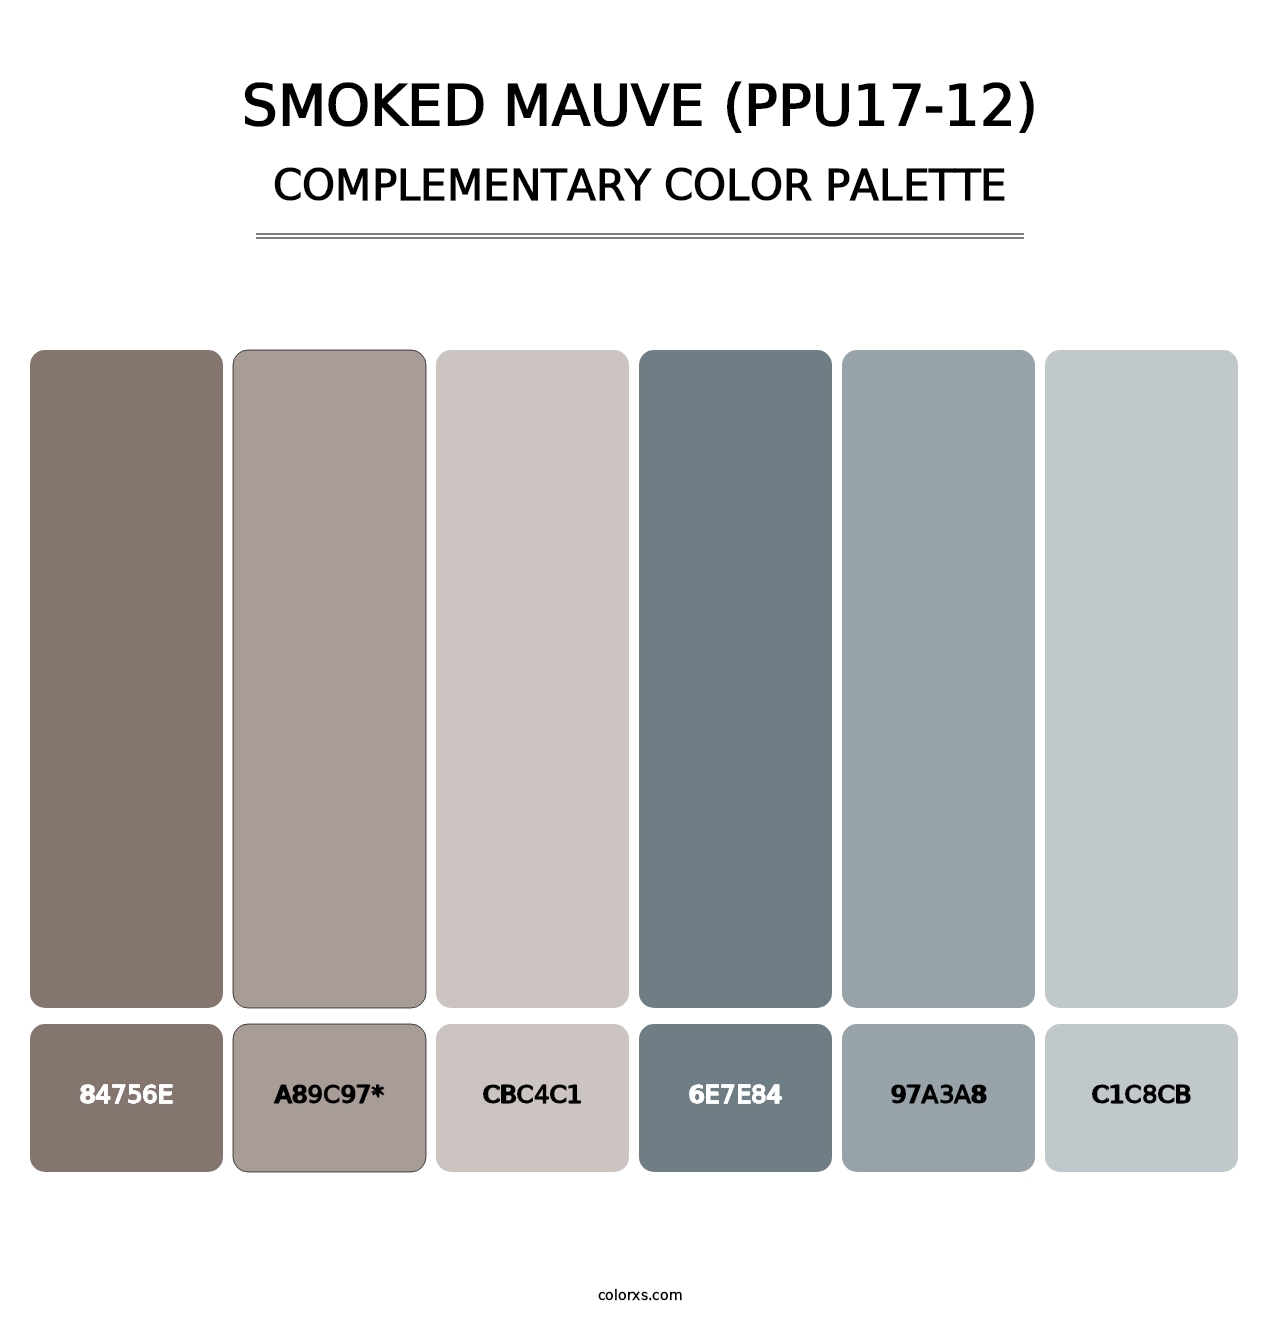 Smoked Mauve (PPU17-12) - Complementary Color Palette